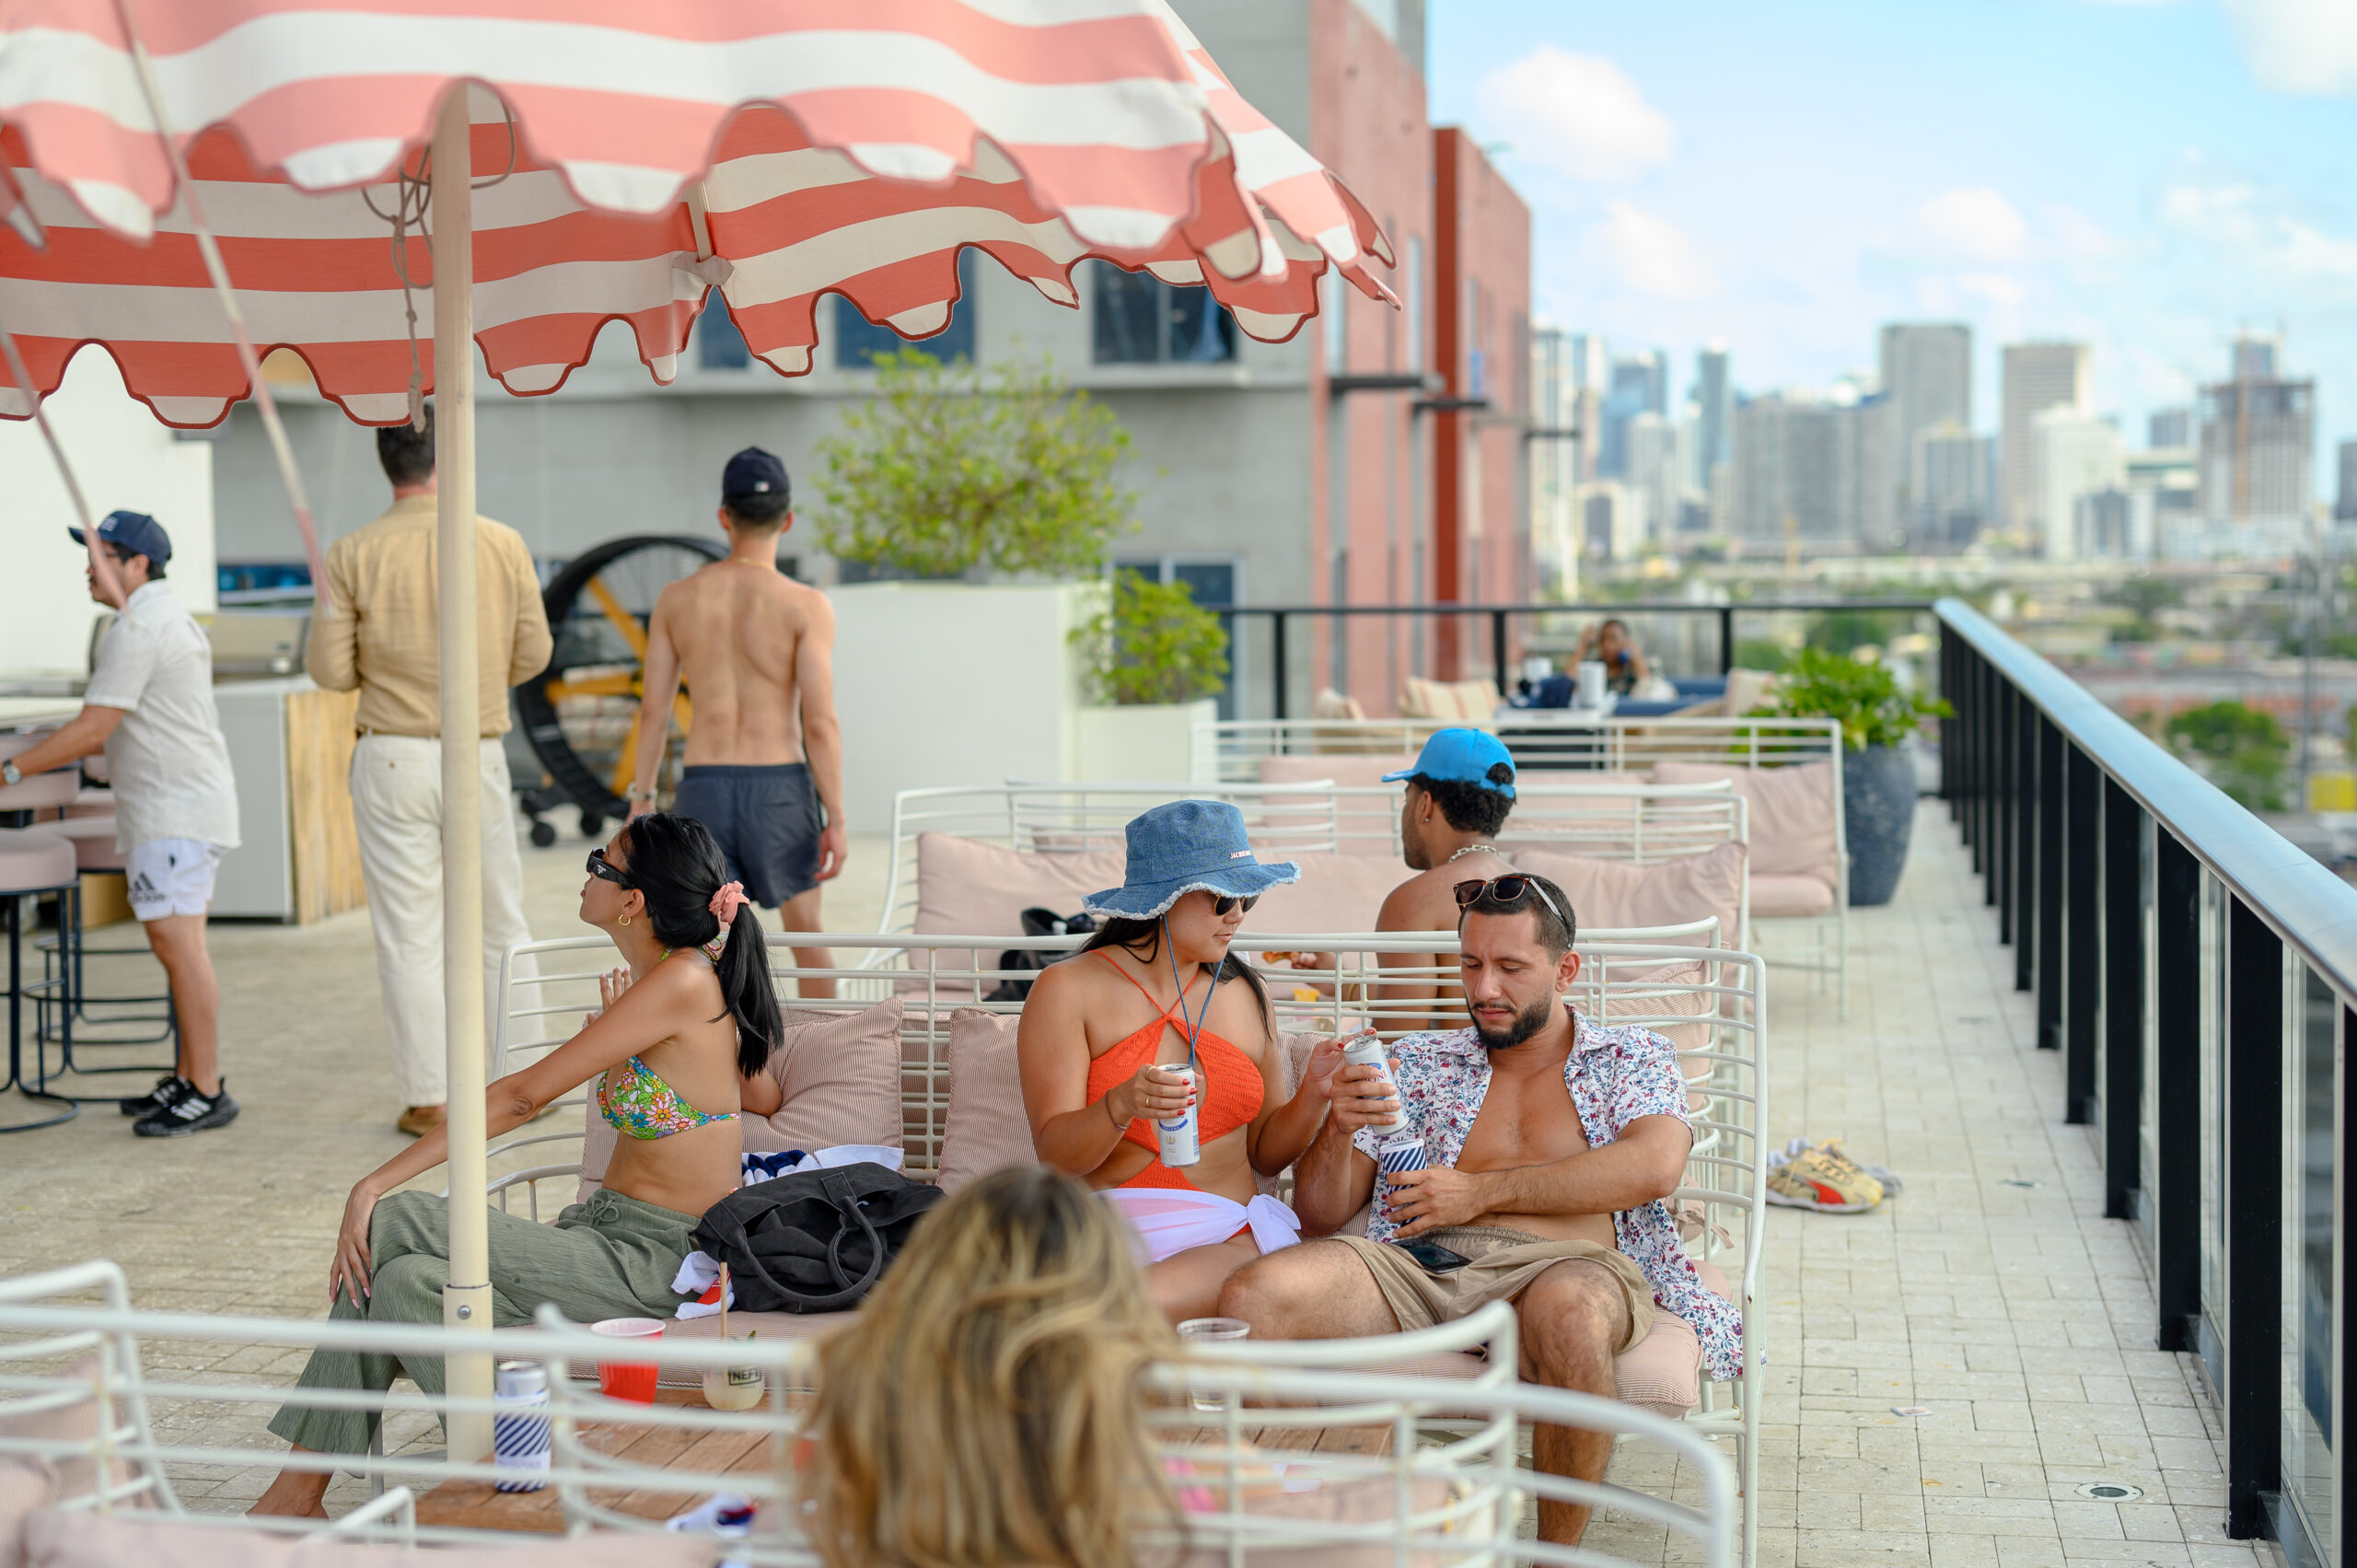 People relaxing and socializing on a rooftop terrace with city views. Some are under striped umbrellas, while others enjoy drinks and conversation.